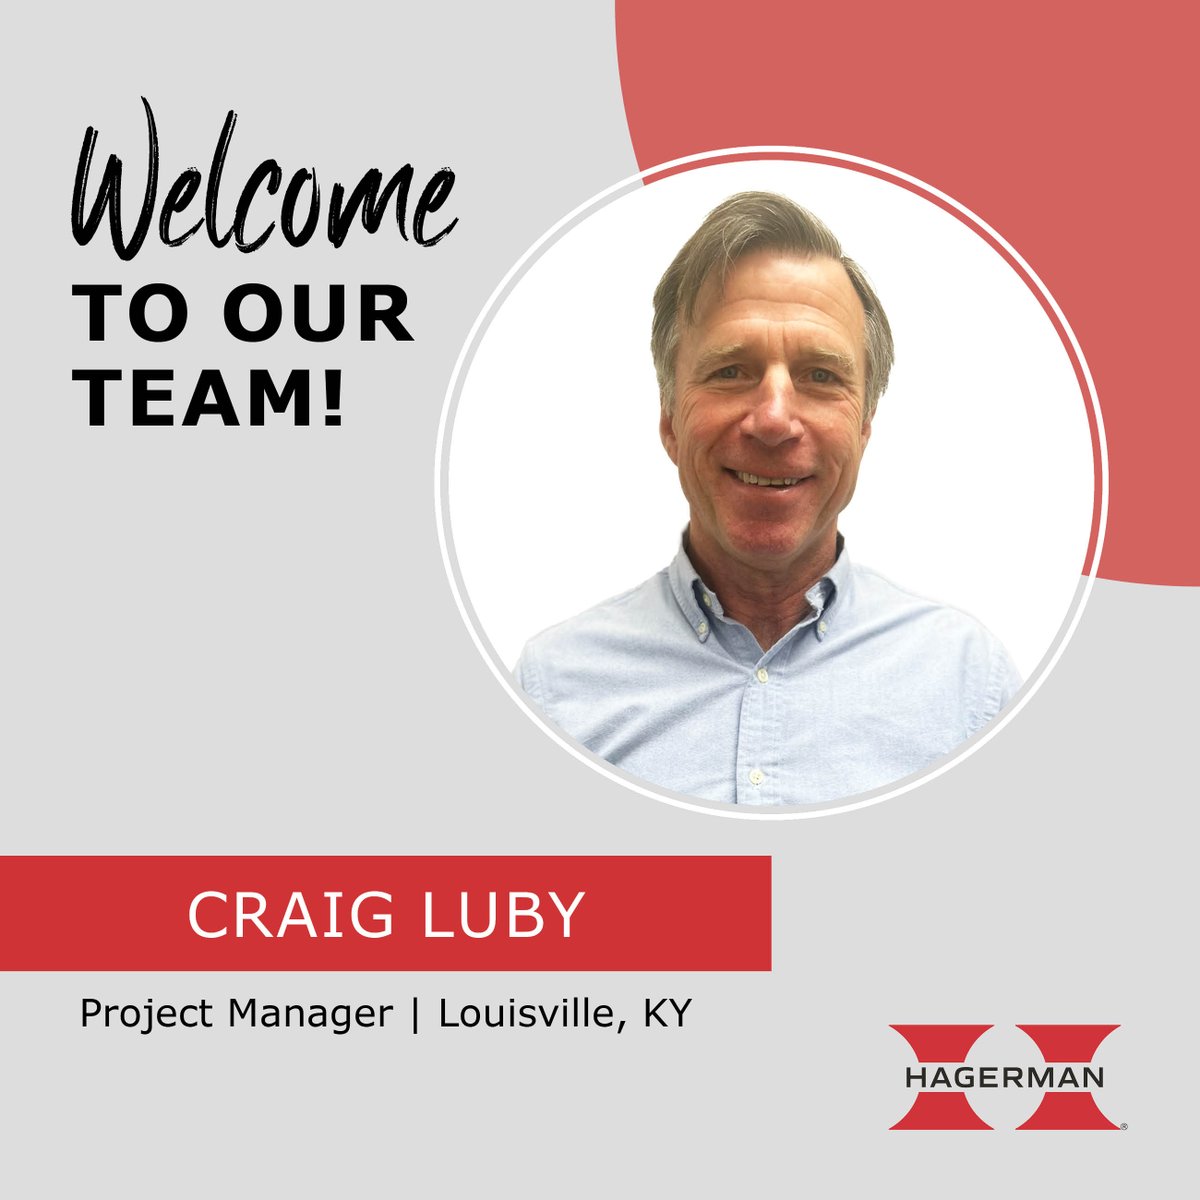 Please welcome Craig Luby! He has nearly 25 years of experience in the construction industry, having worked primarily as a Project Manager, and in roles including Safety Director and Estimator.

Welcome, Craig! #BuildingABetterFuture #ConstructionSolutionsProvider